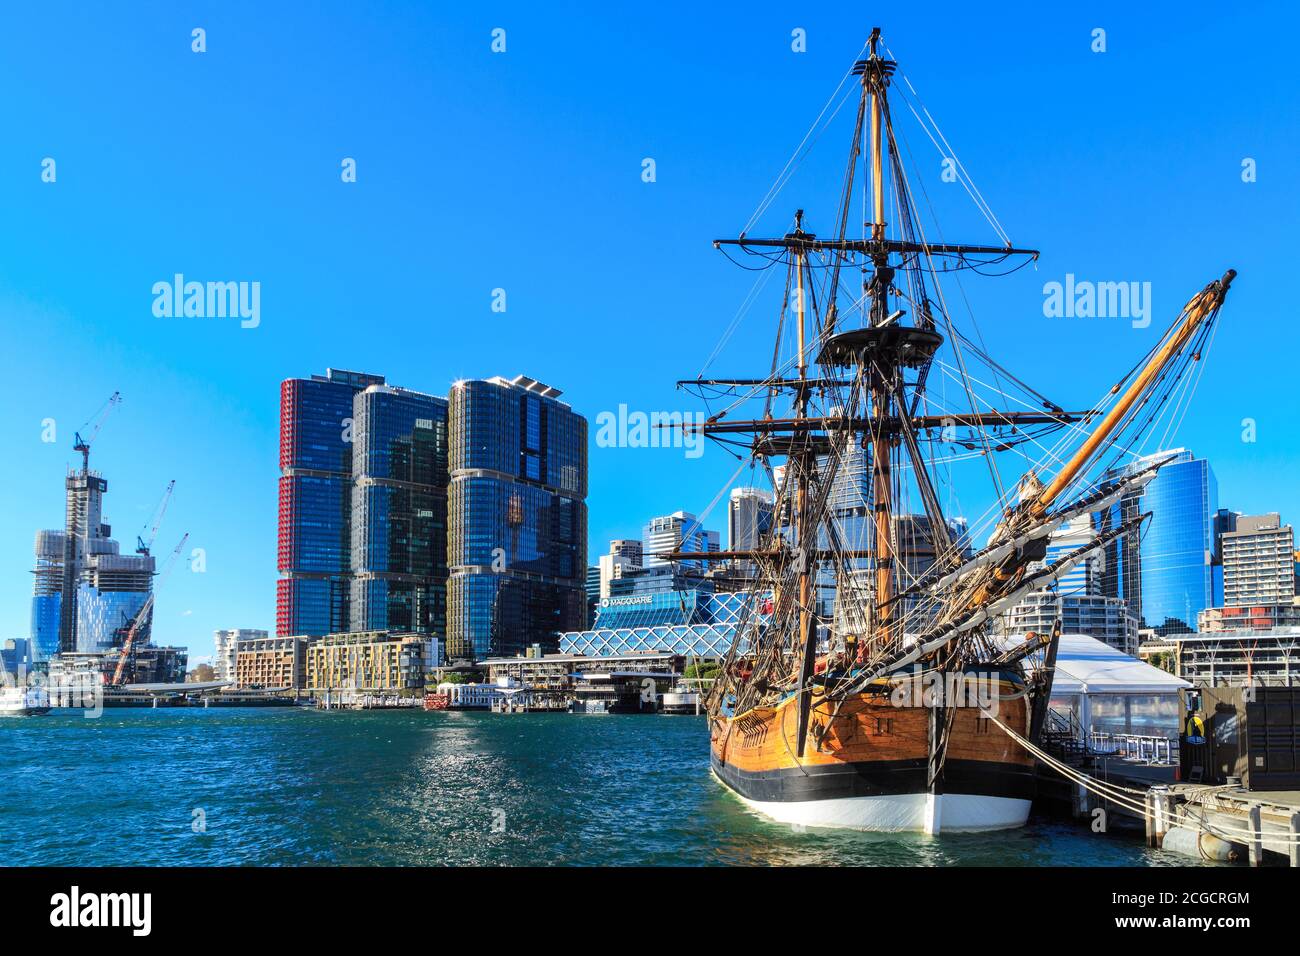 Replica of Captain Cook's ship HMS 'Endeavour' in Darling Harbour, Sydney, Australia. In the background are the International Towers Stock Photo